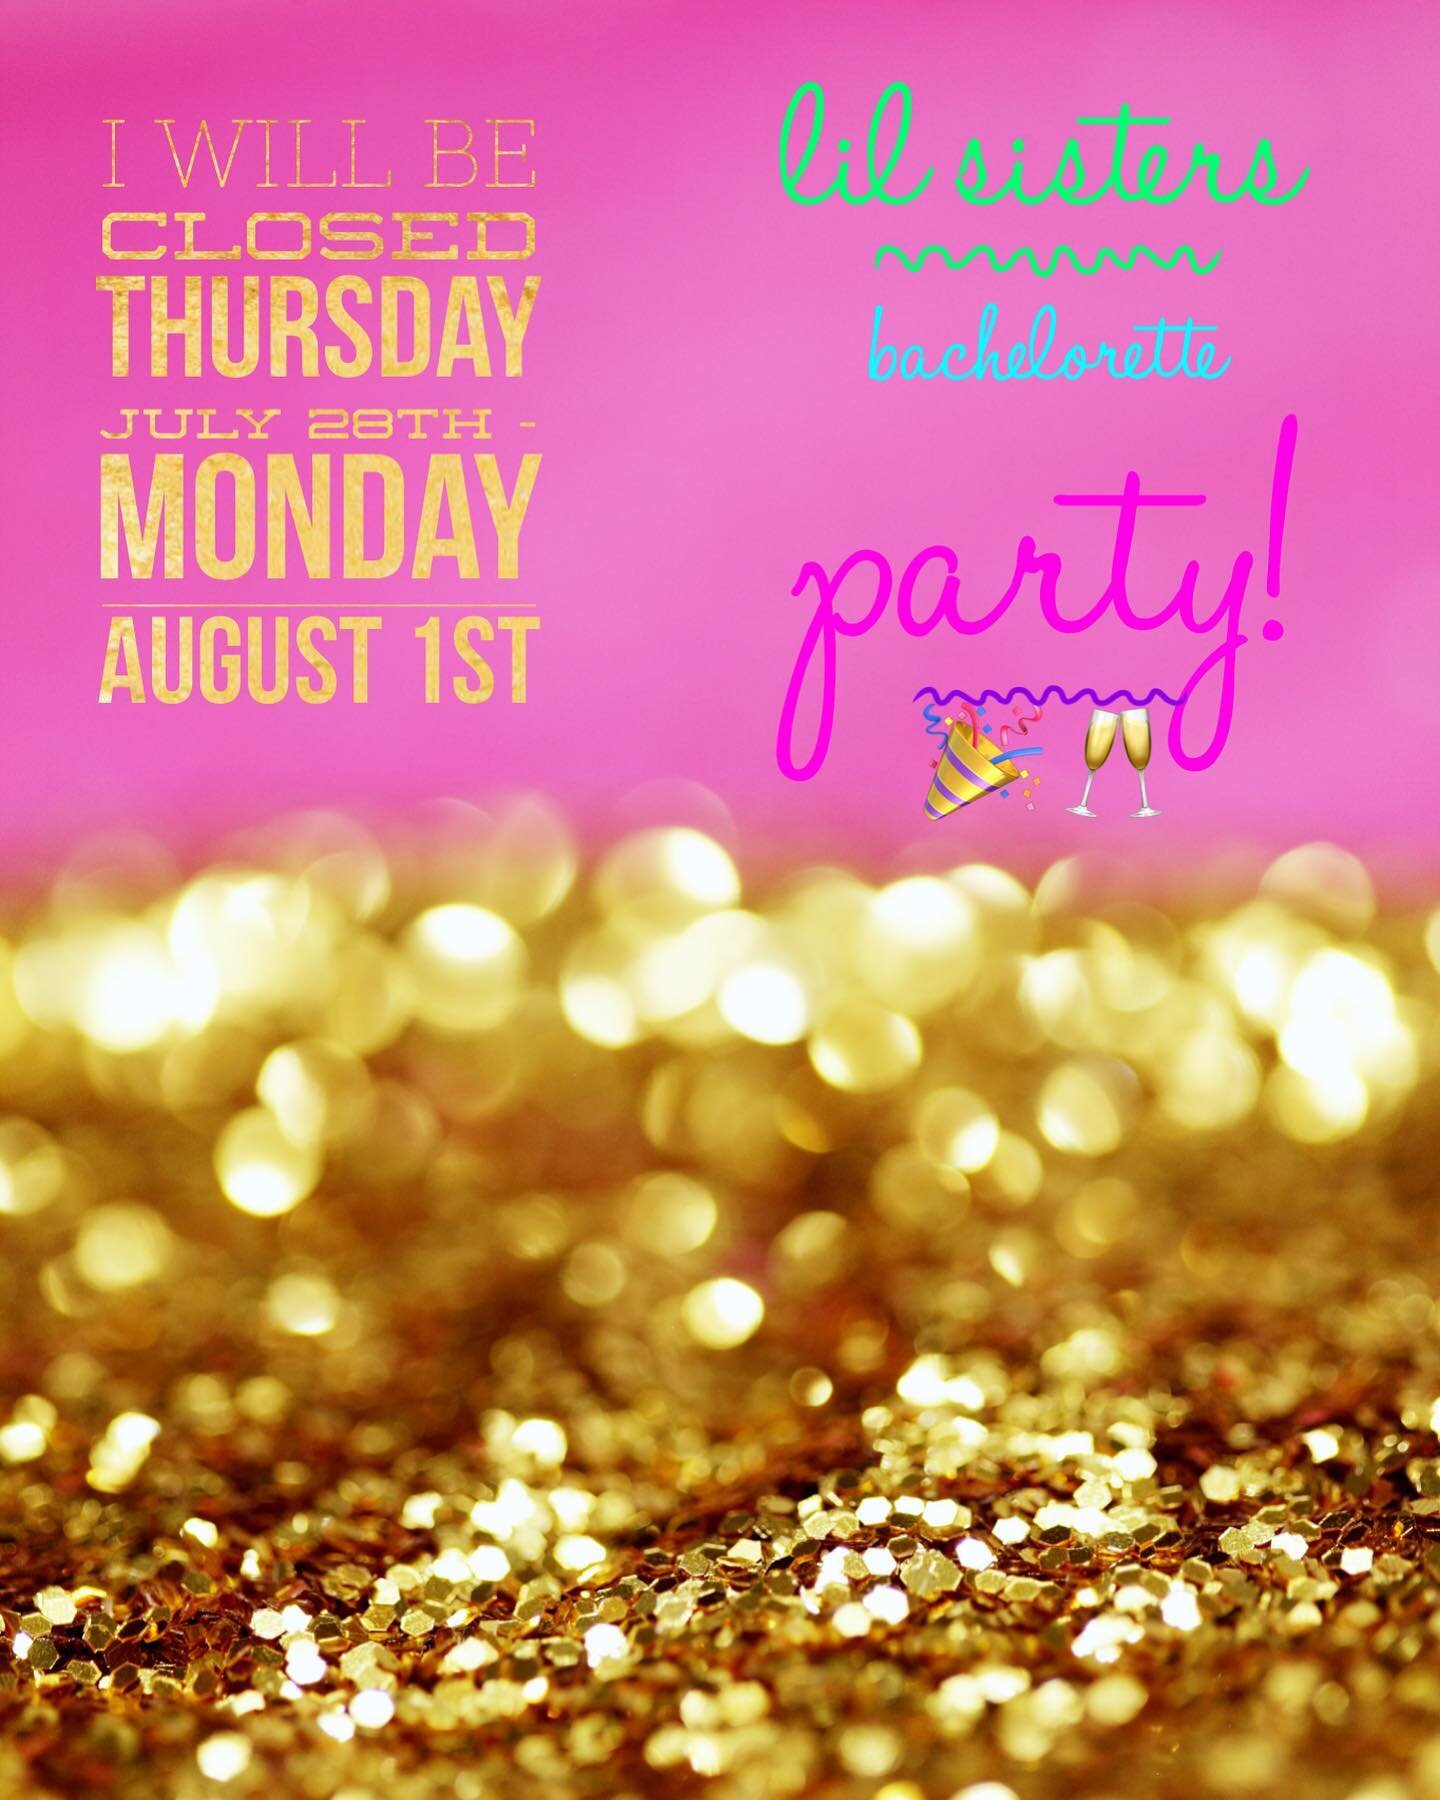 MY SISTER IS GETTING MARRIED!! Celebrations will be happening 🎉🎉 🥂 I will return to regular business hours Tuesday August 2nd. #bacheloretteparty #nashville